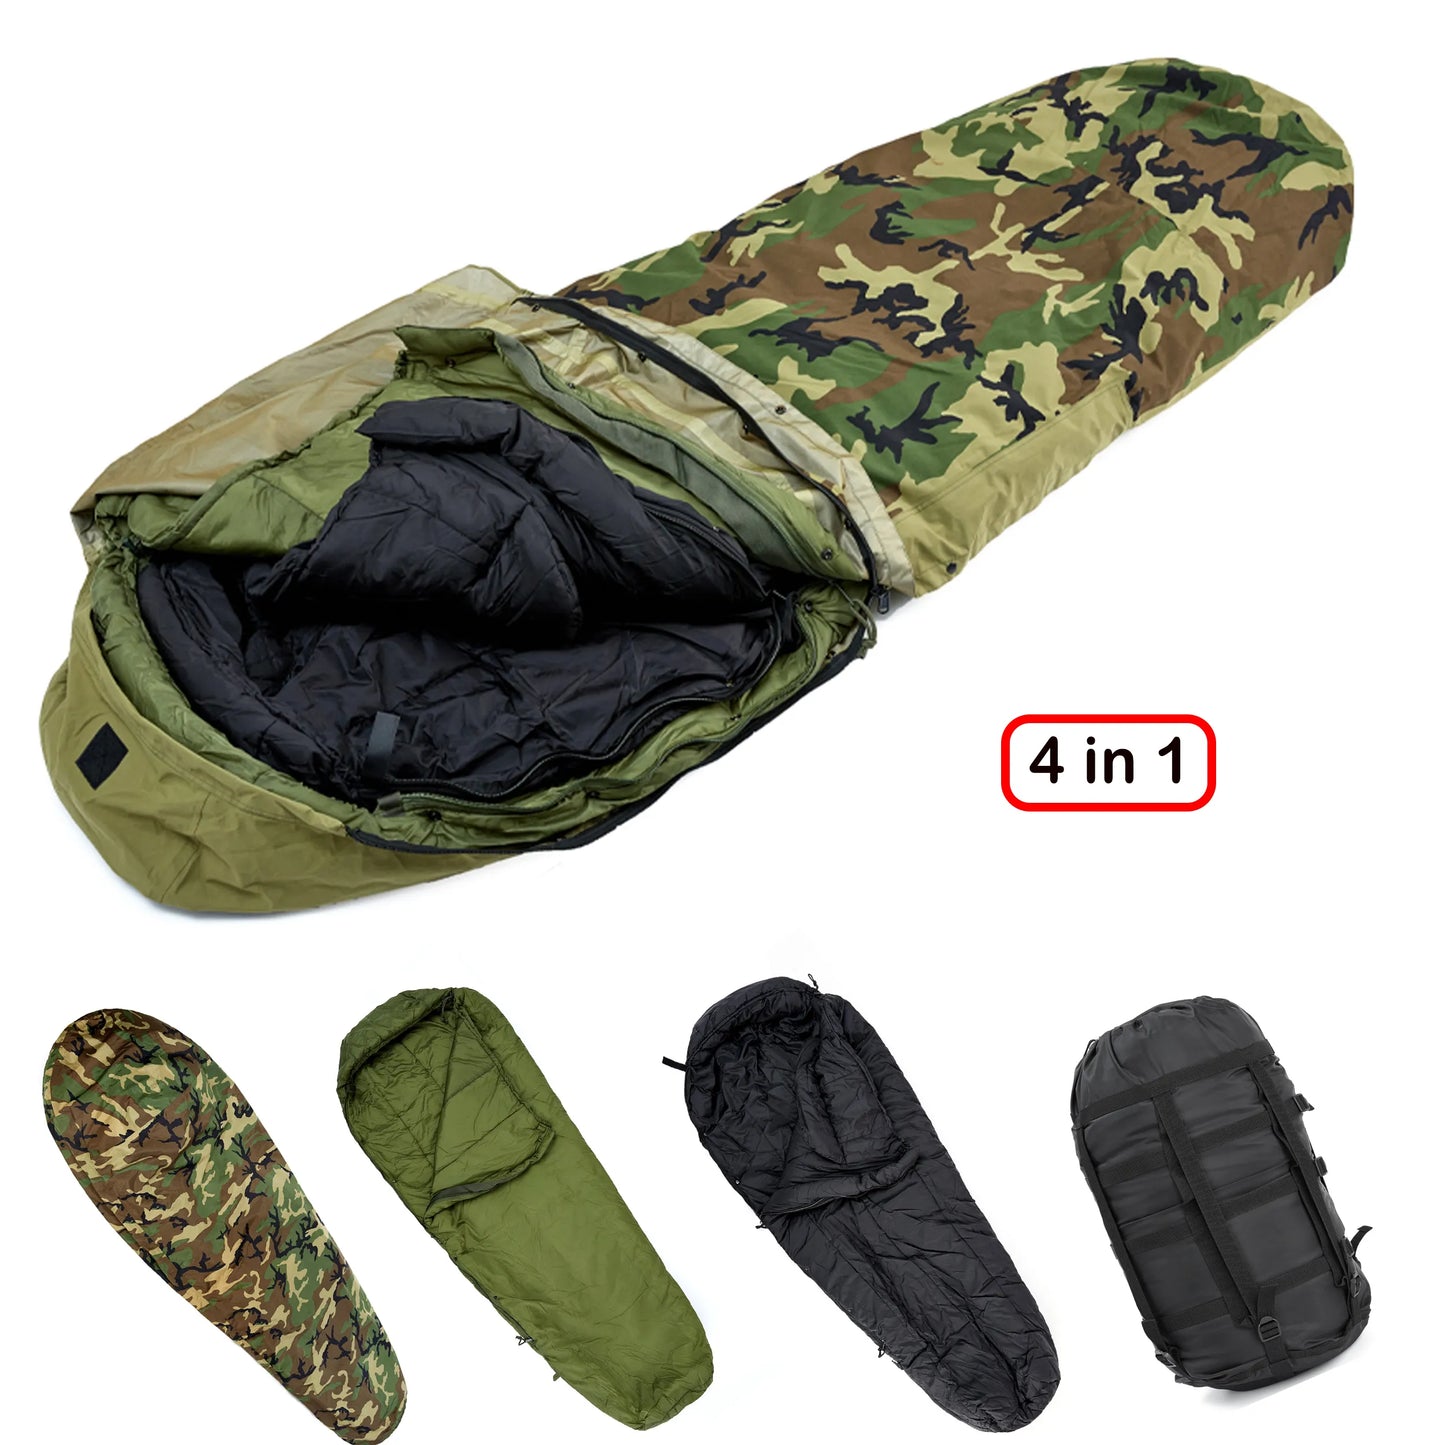 Modular Sleeping Bag with Liner- rated to minus 4 degrees Fahrenheit